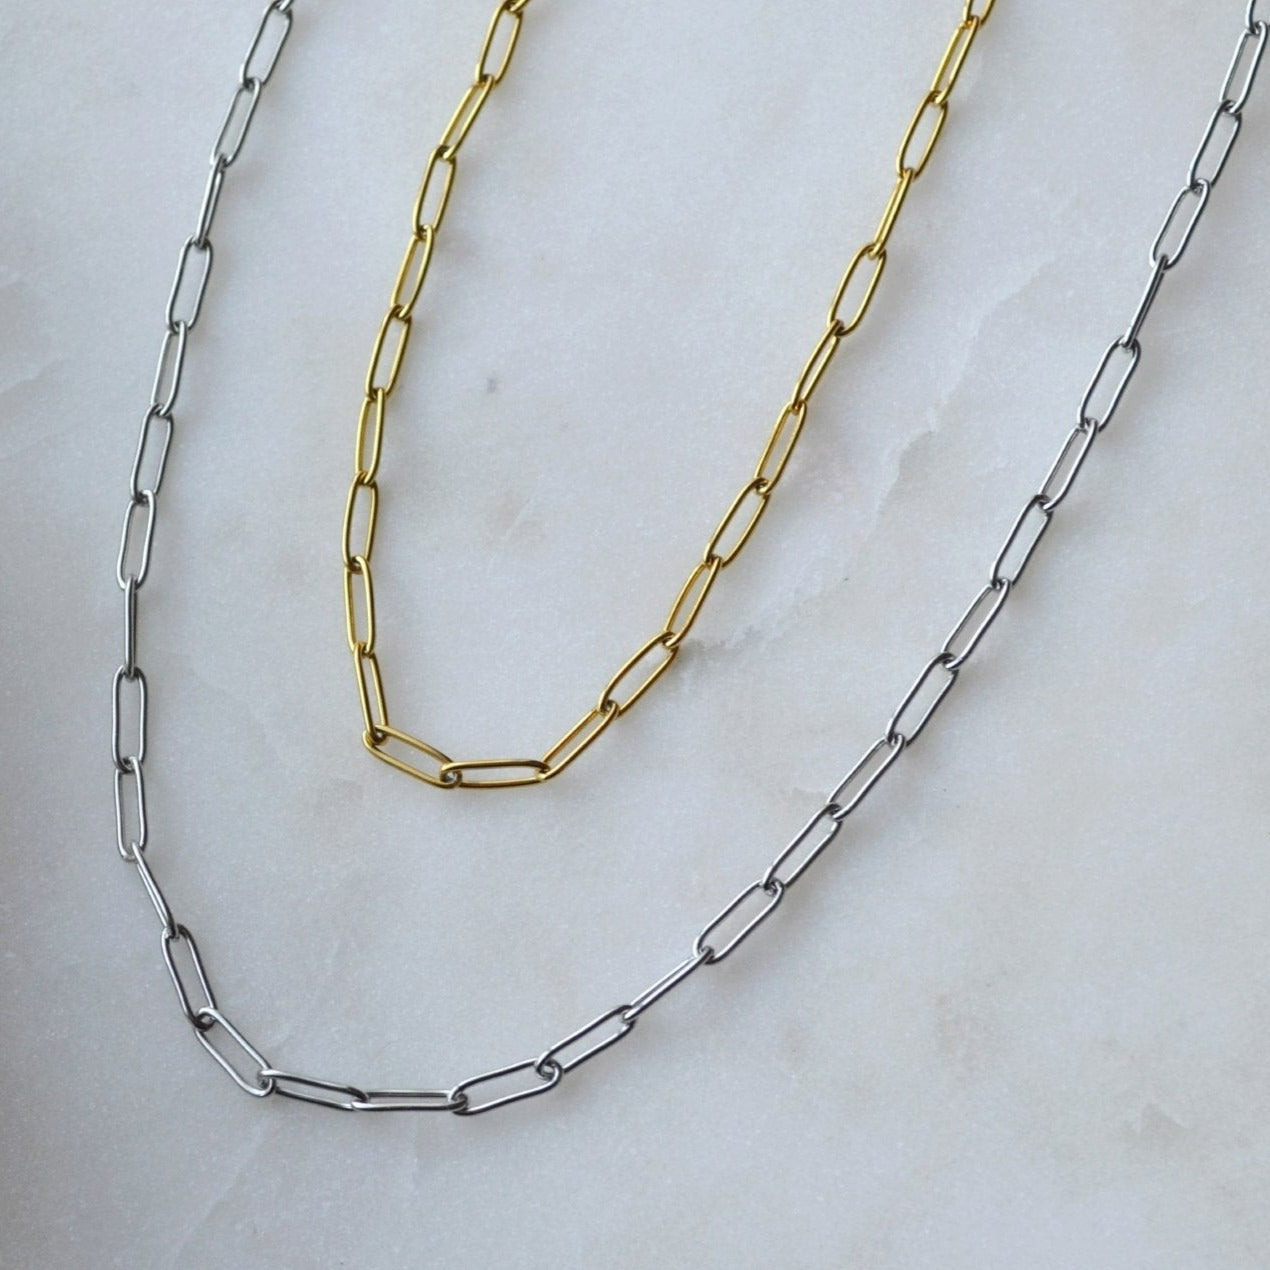 Silver or Gold 4mm Paperclip Link Chain Necklace For Women or Men - Necklace - Boutique Wear RENN